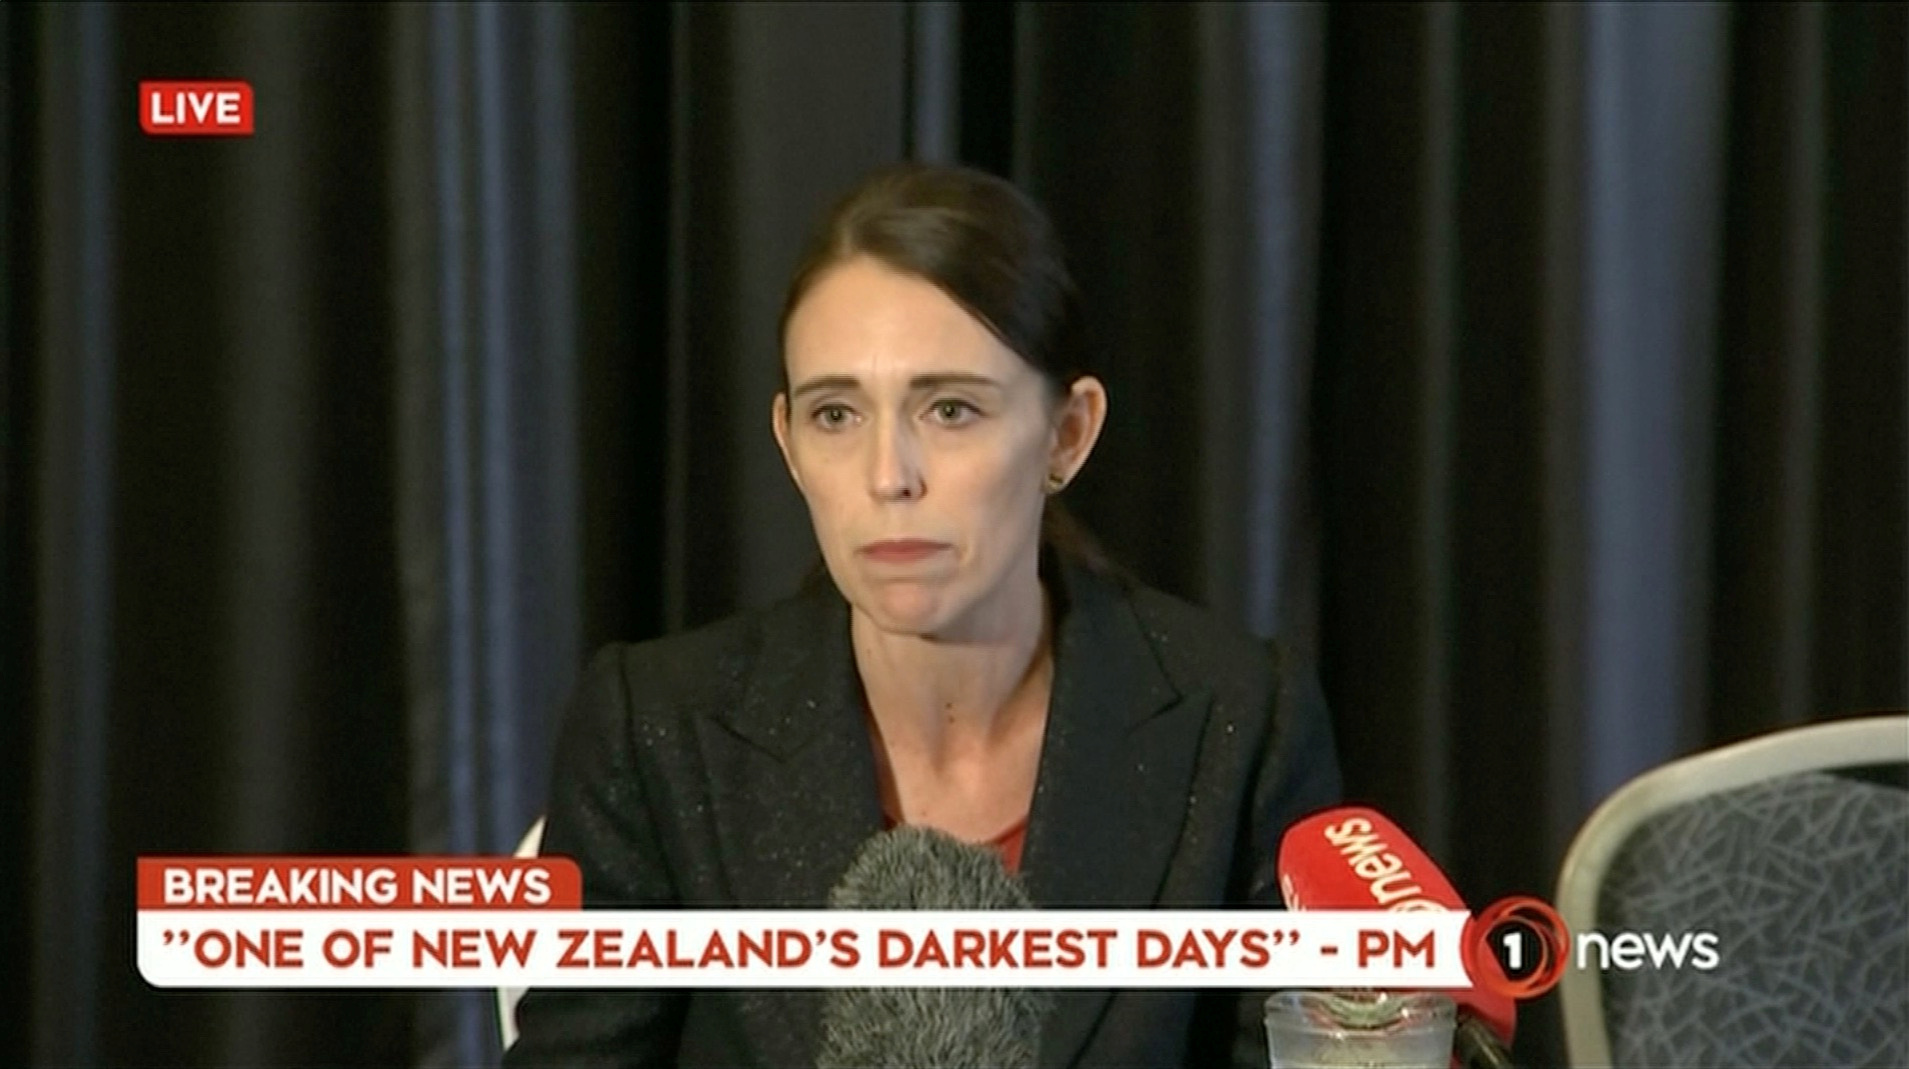 New Zealand's Prime Minister Jacinda Ardern speaks on live television following fatal shootings at two mosques in central Christchurch, New Zealand March 15, 2019, in this still image taken from video. TVNZ/via REUTERS TV